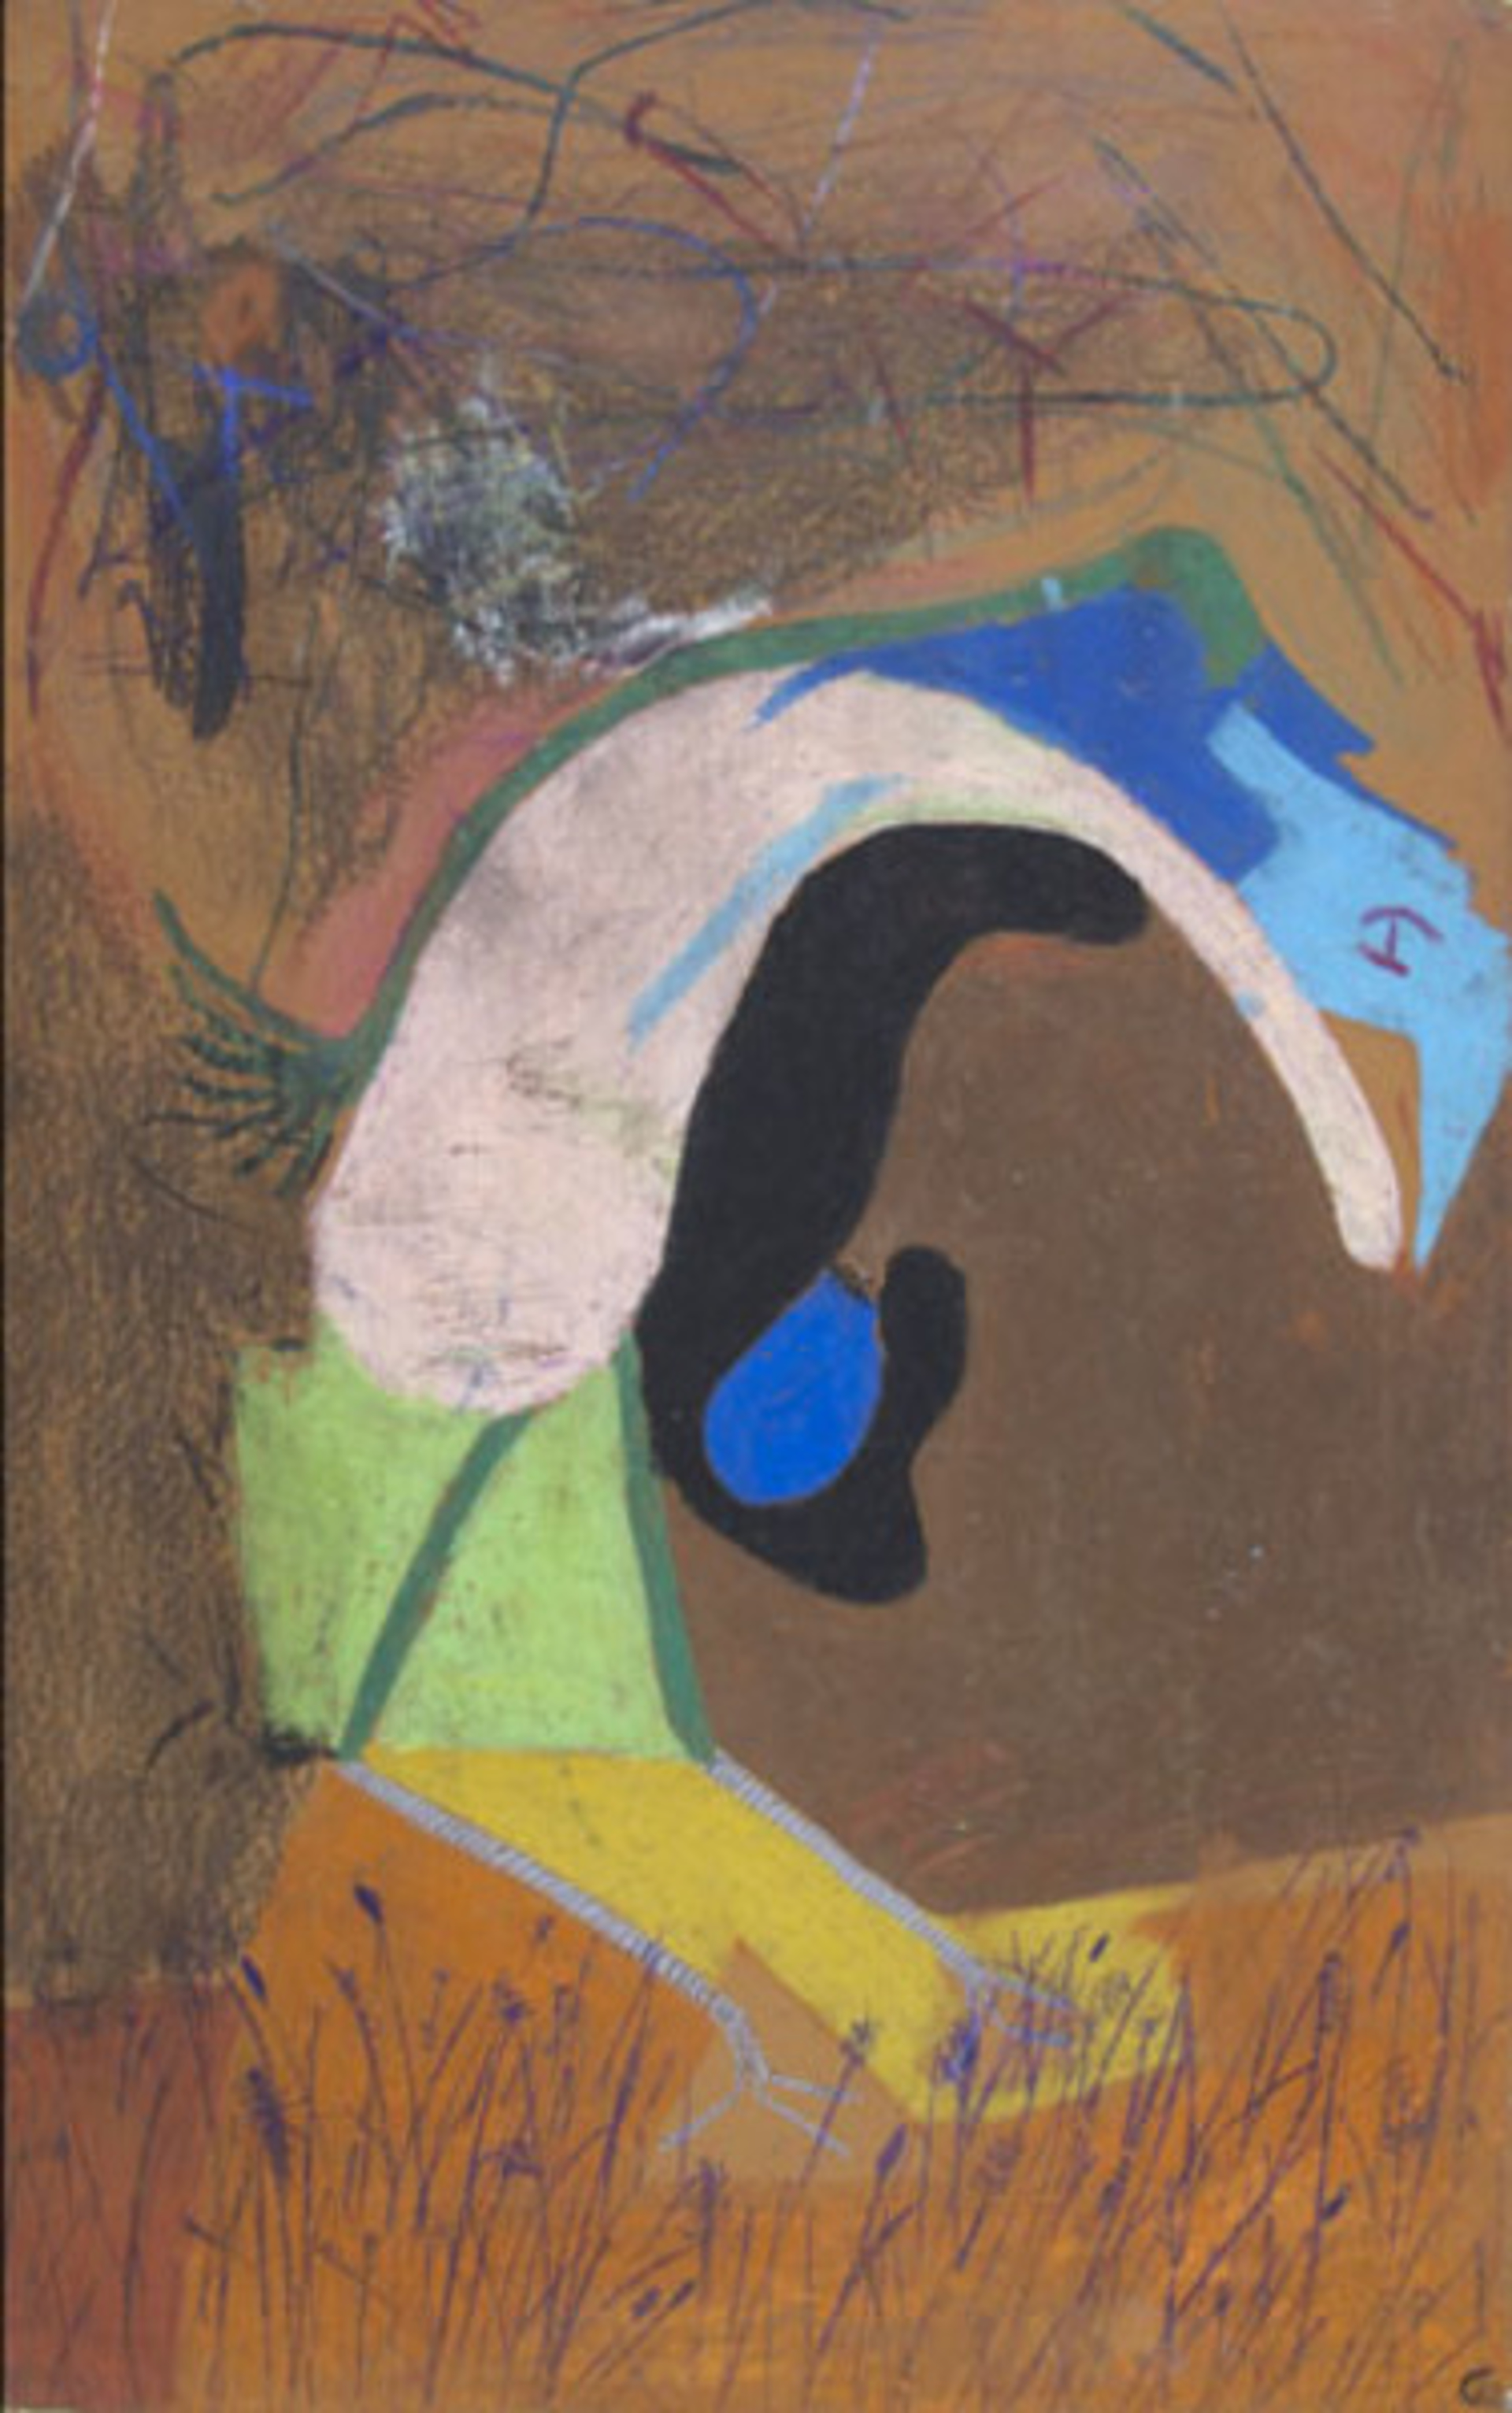 The First bird with Egg, Duckling Abstraction by Reginald K. Gee